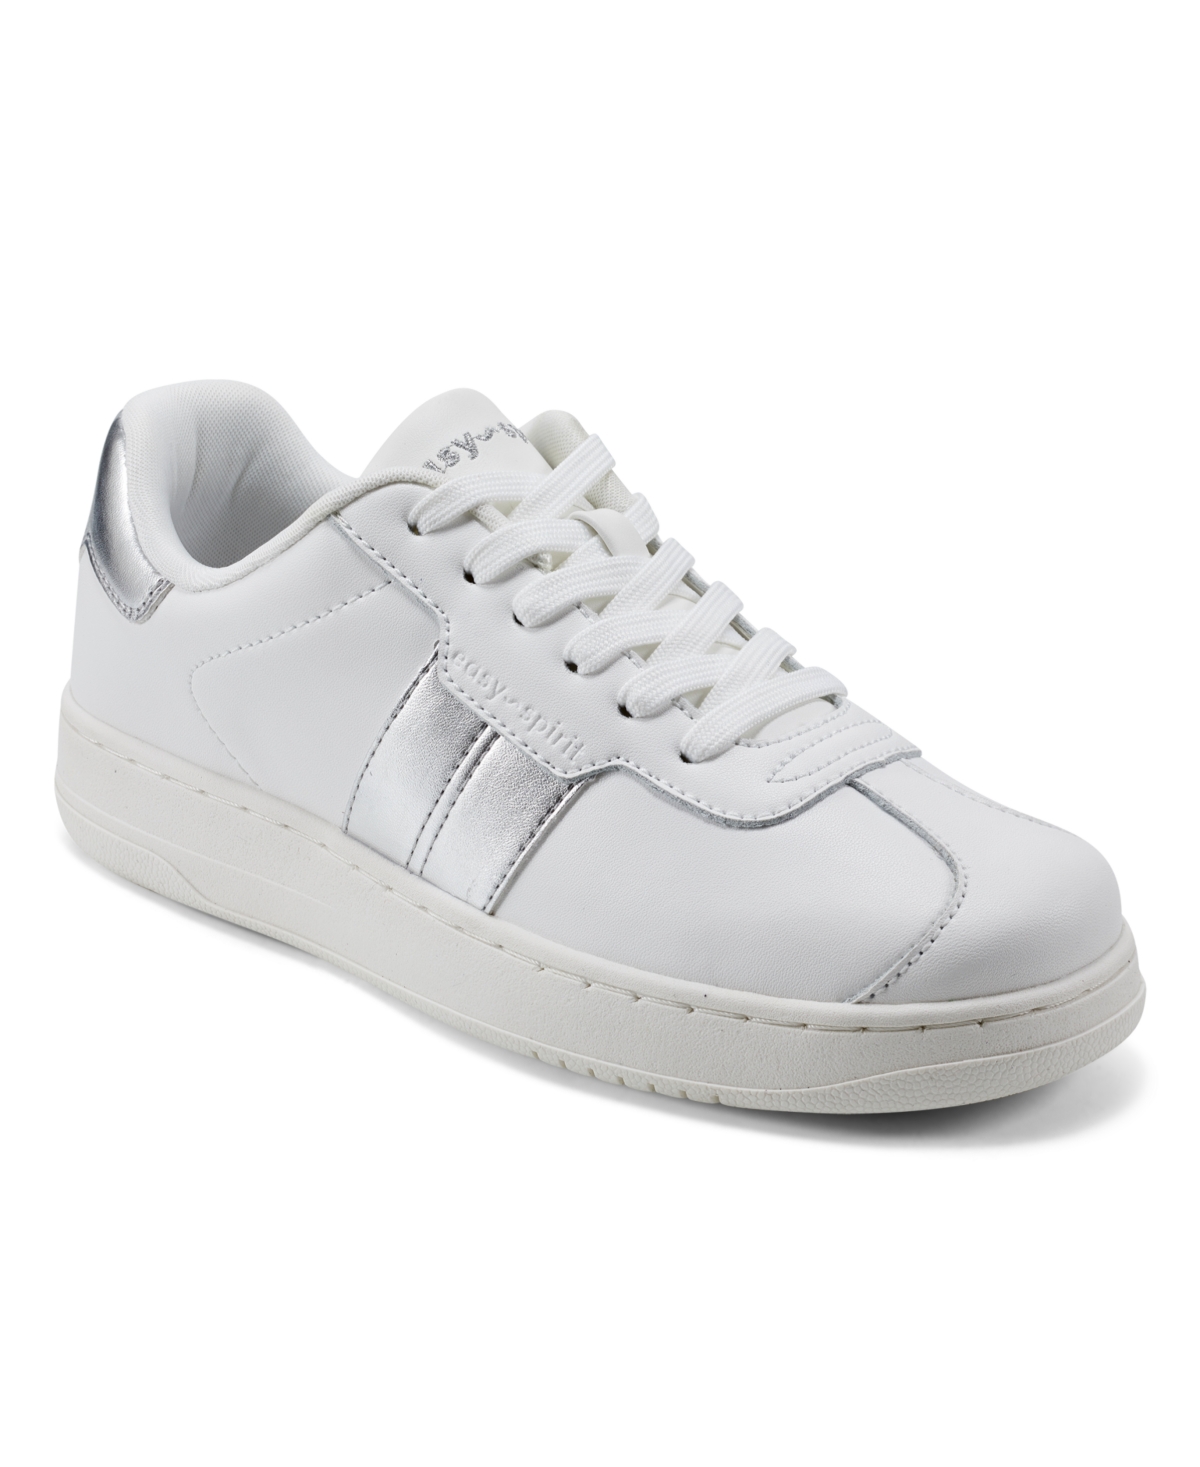 Women's Caren Round Toe Casual Lace-up Sneakers - White